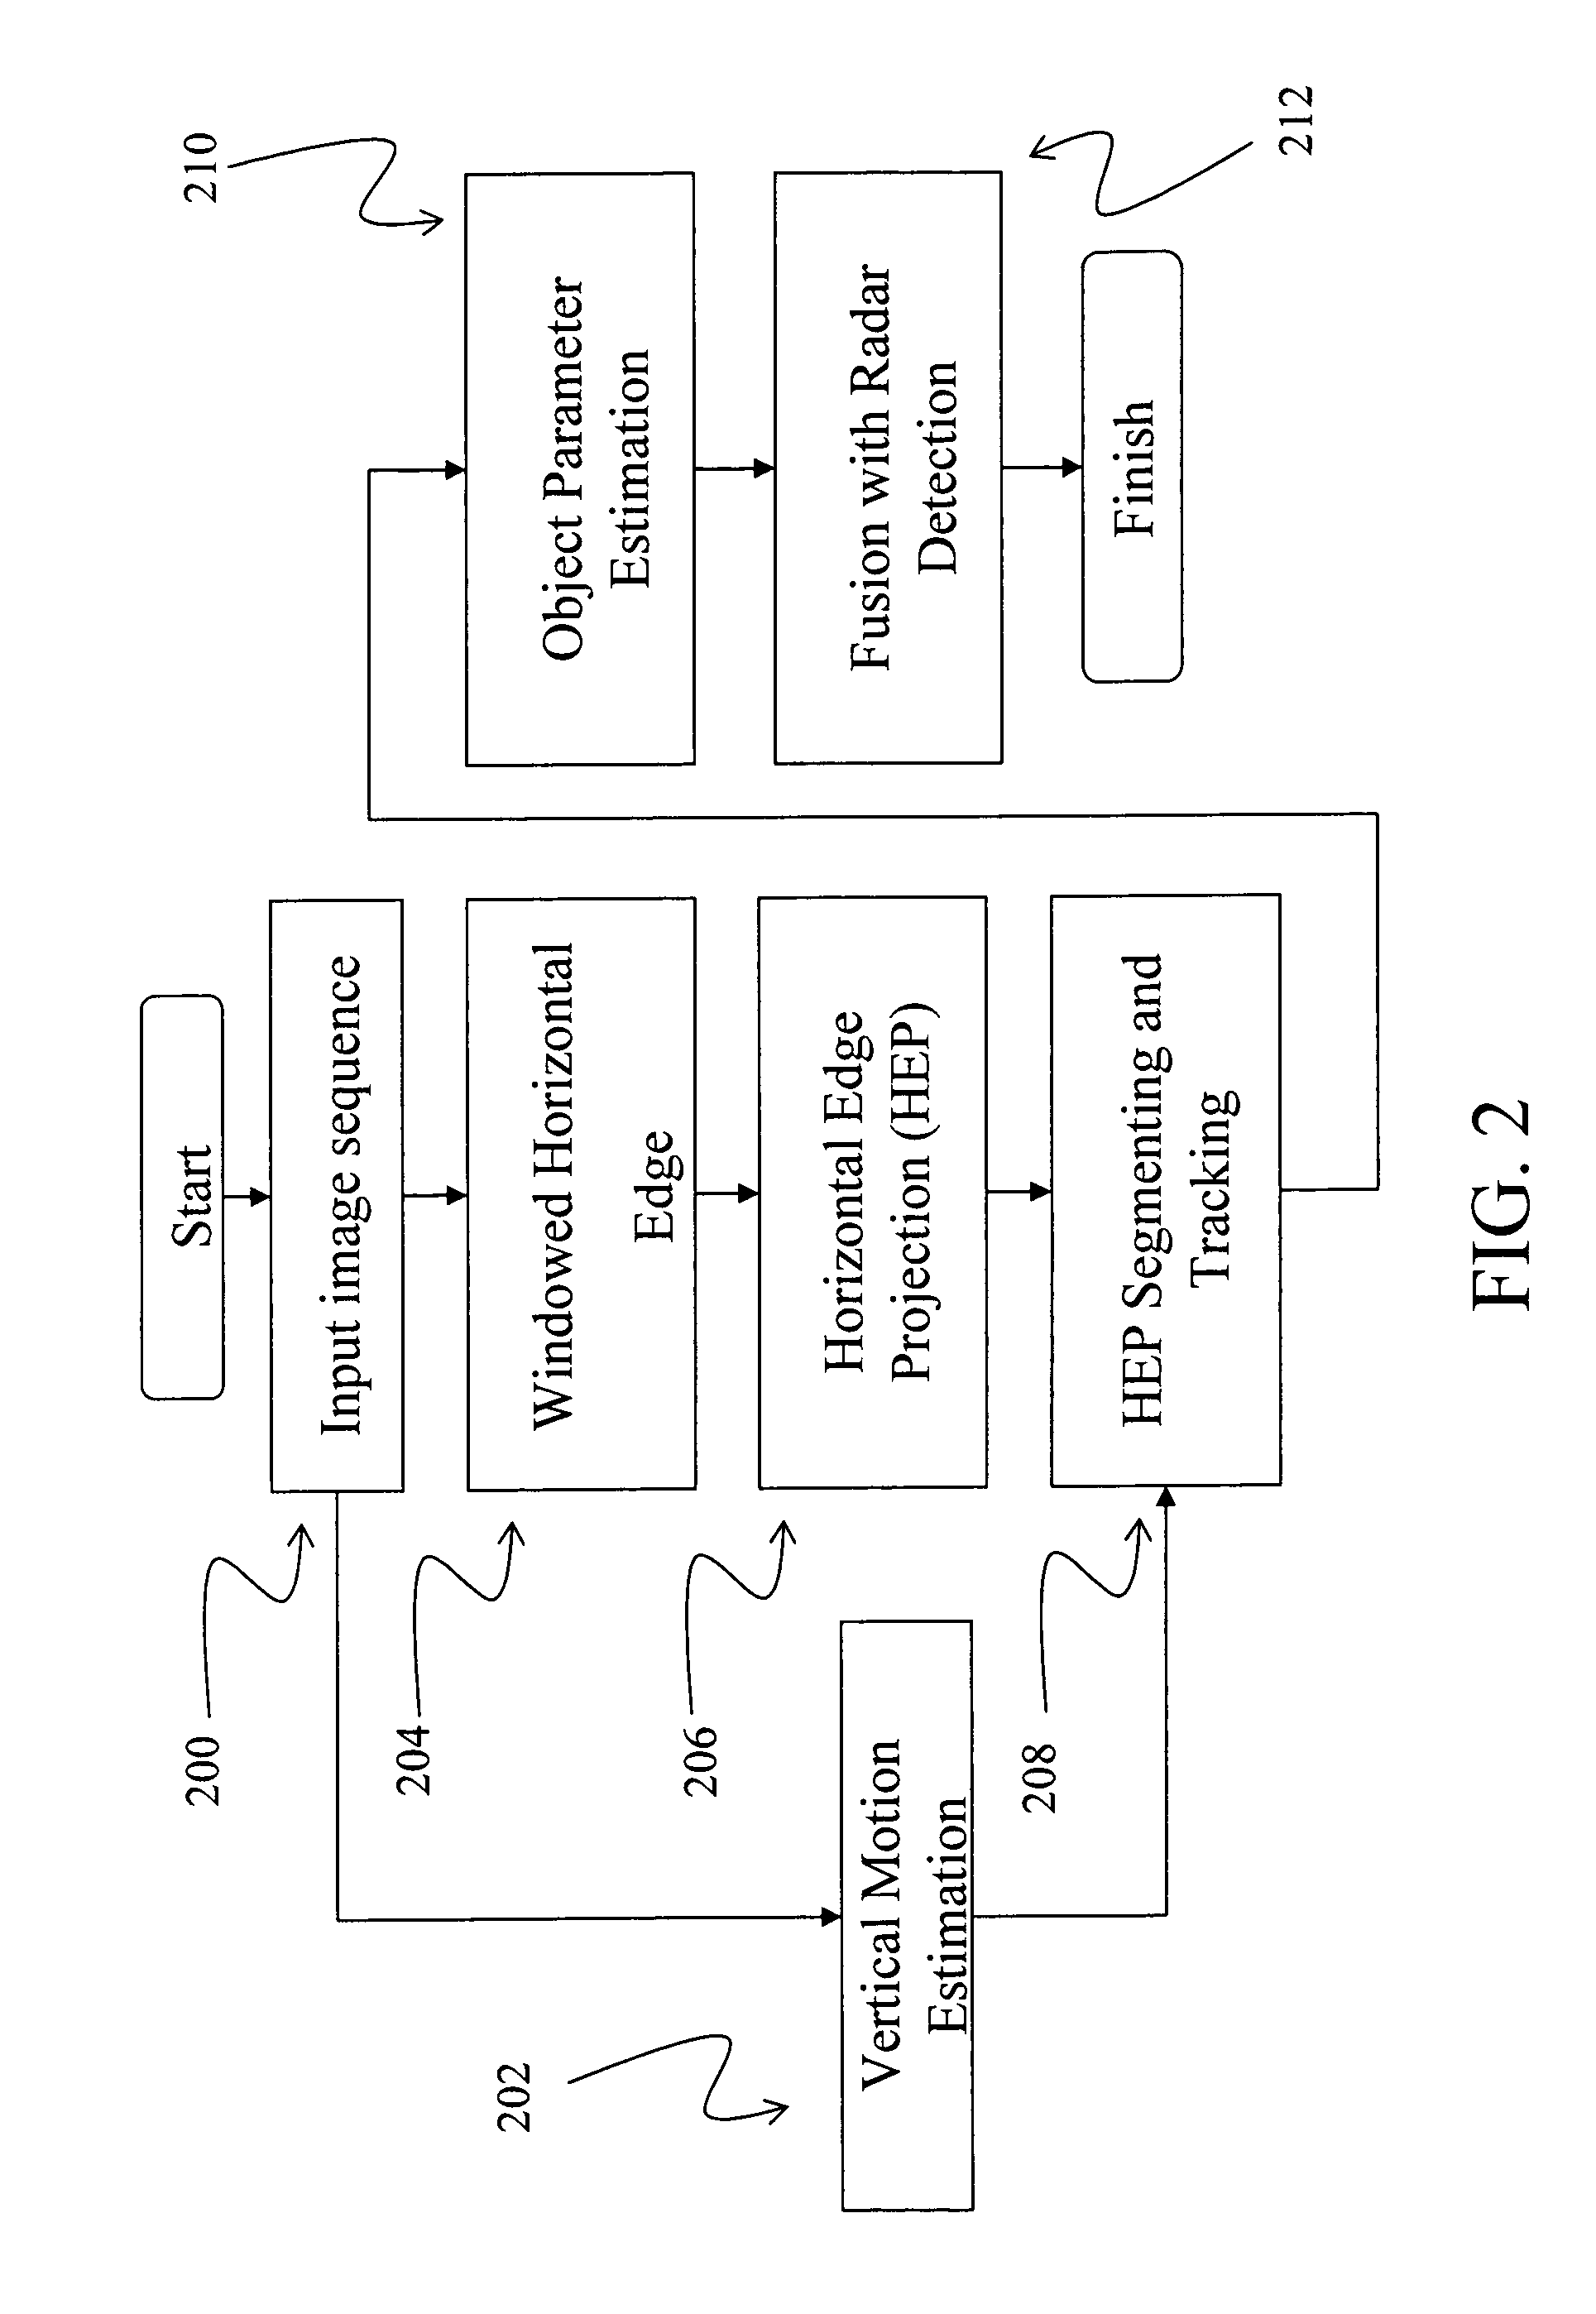 Vision-based highway overhead structure detection system